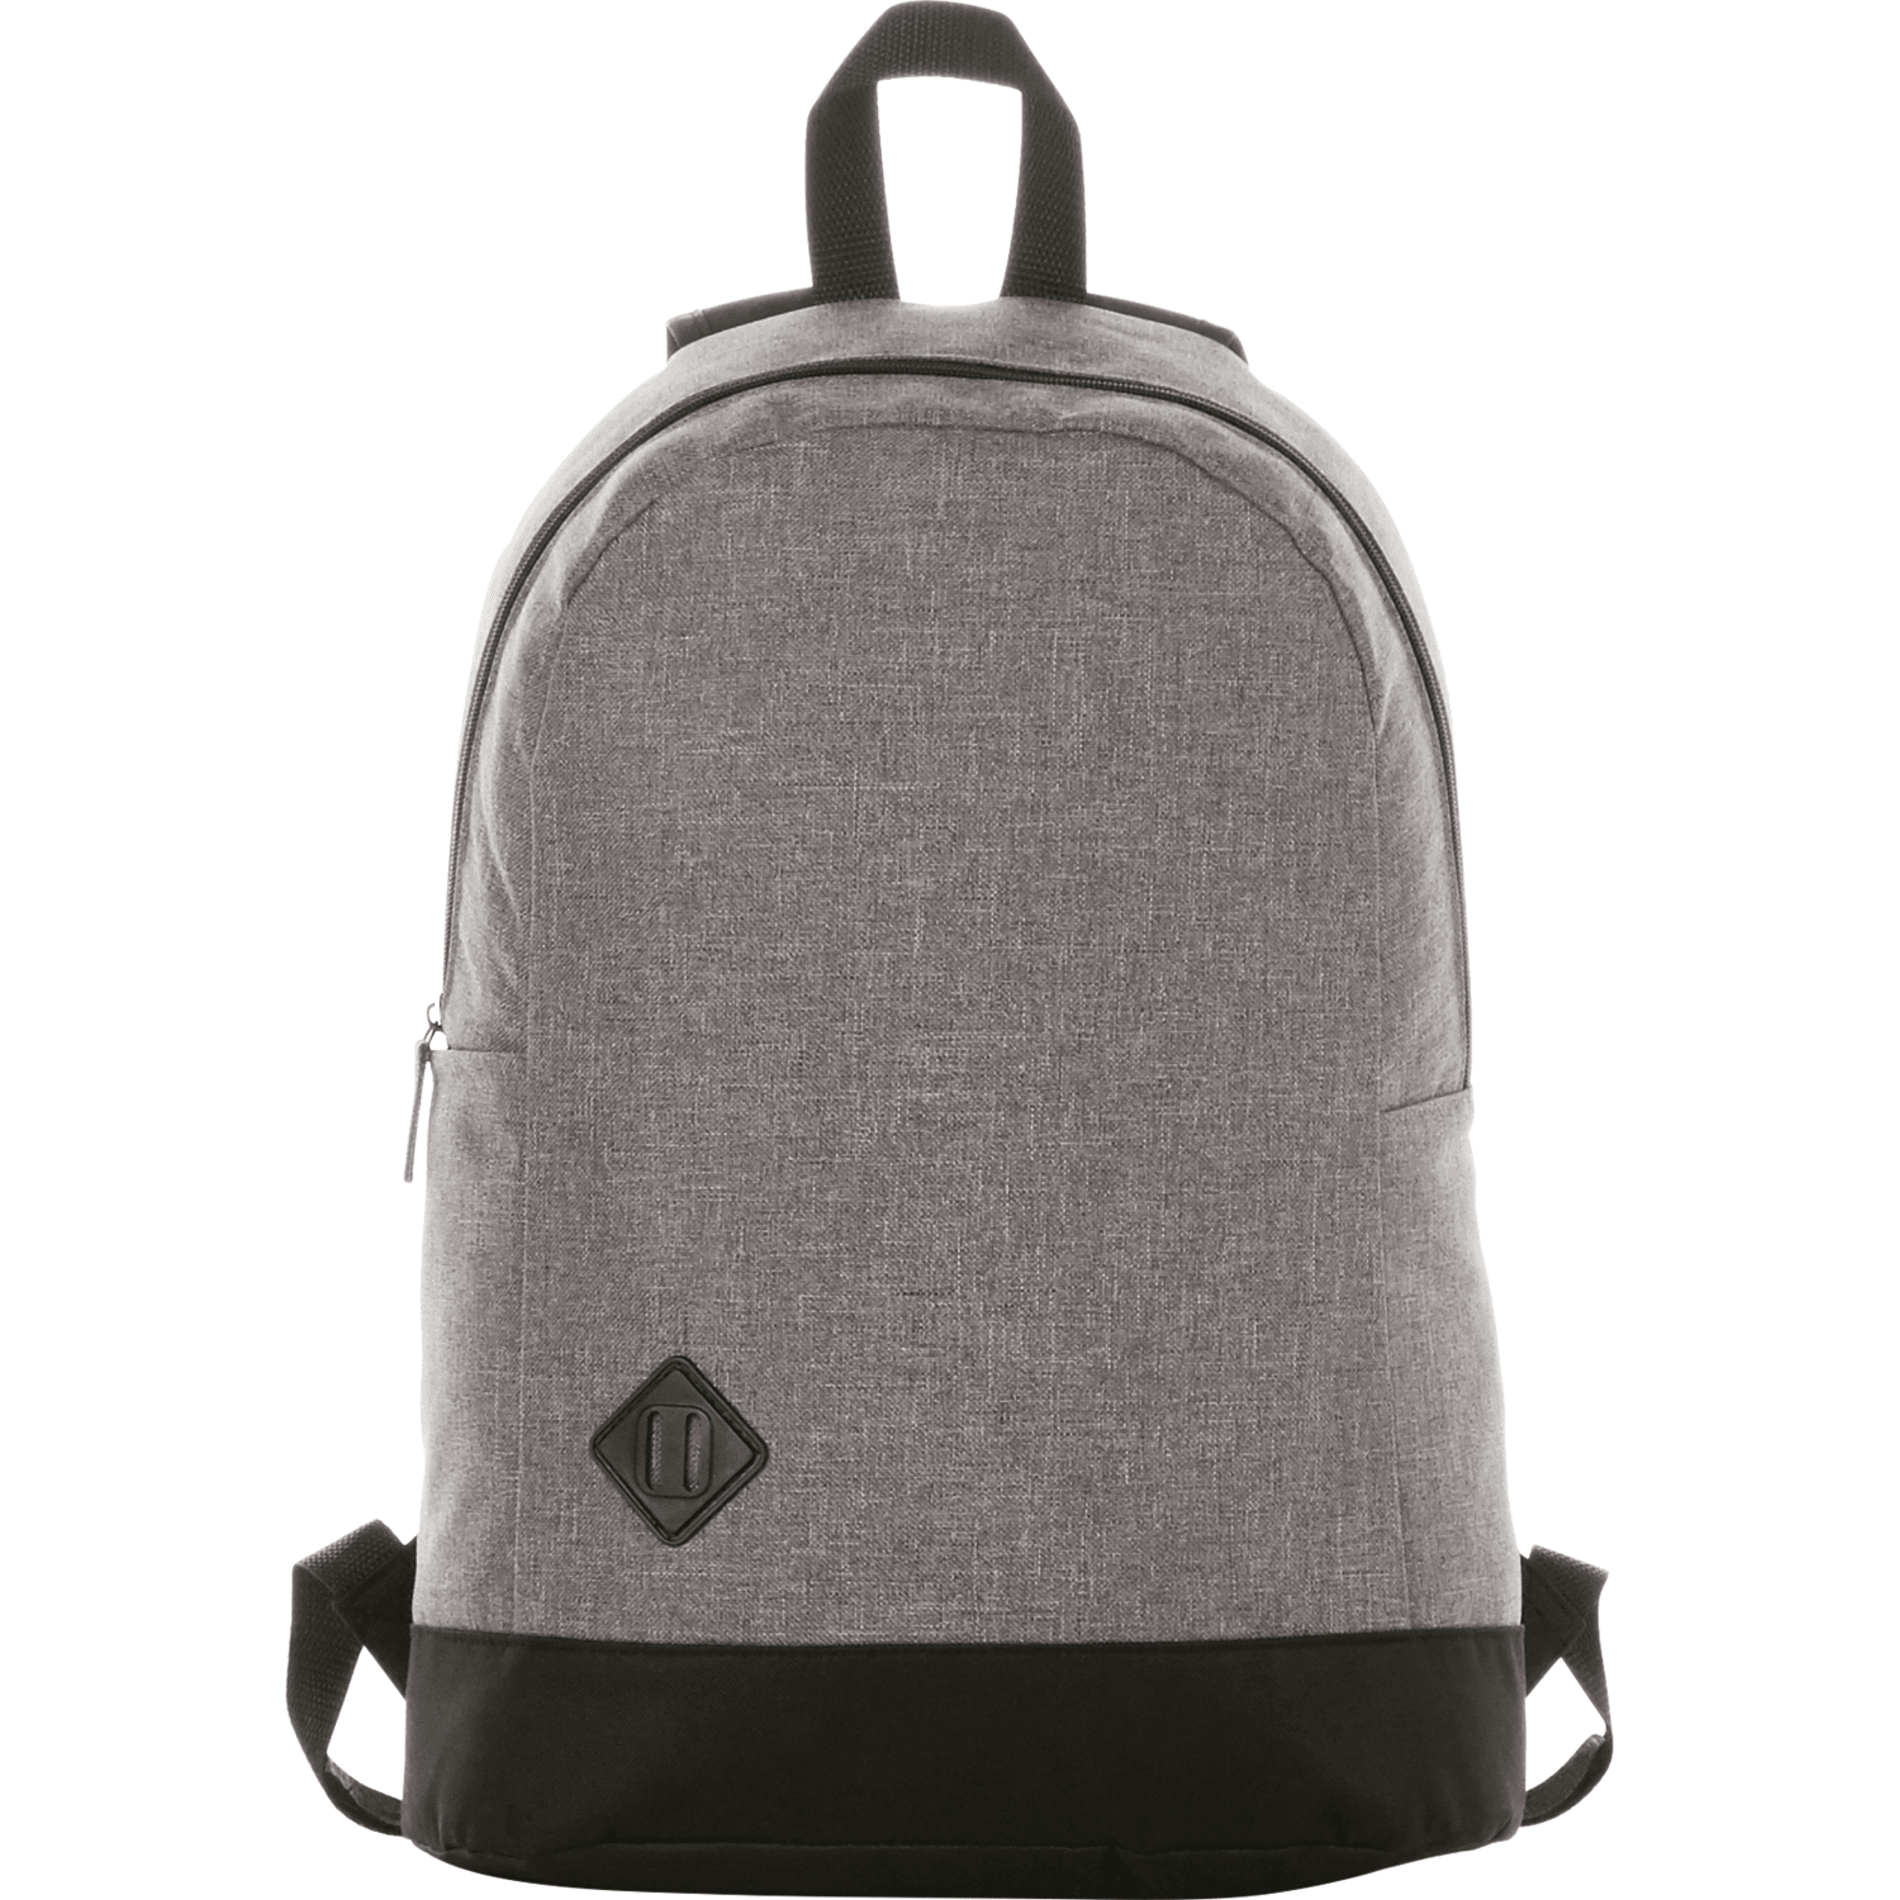 Bullet SM-7779 - Graphite Dome 15" Computer Backpack